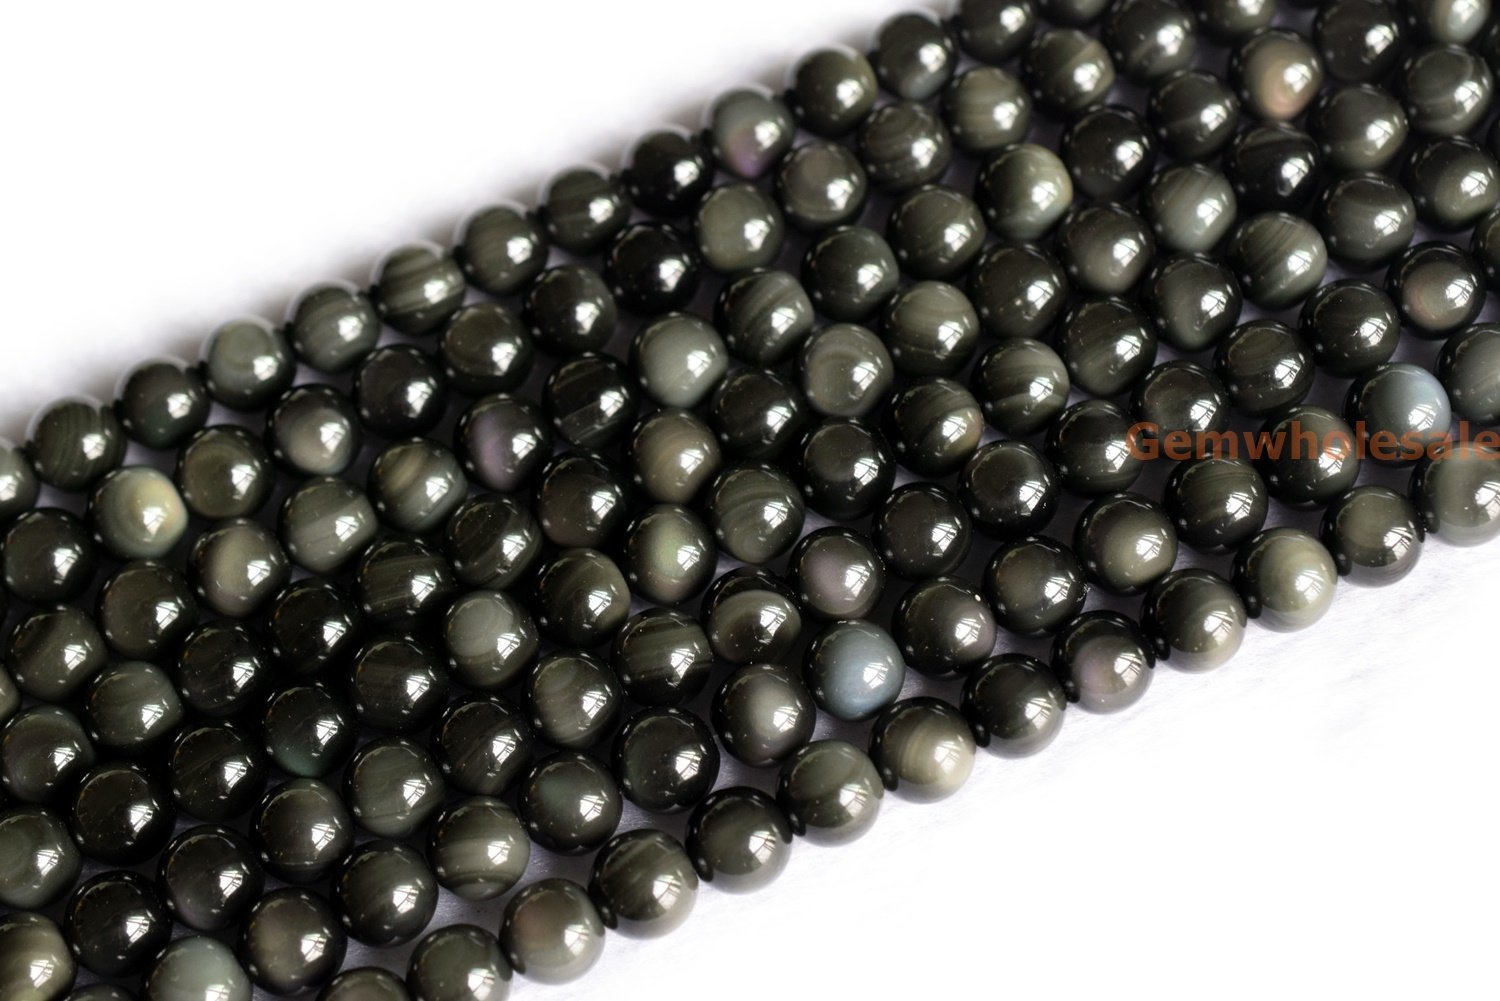 15.5" Natural rainbow obsidian 6mm/8mm/10mm, Black obsidian round beads